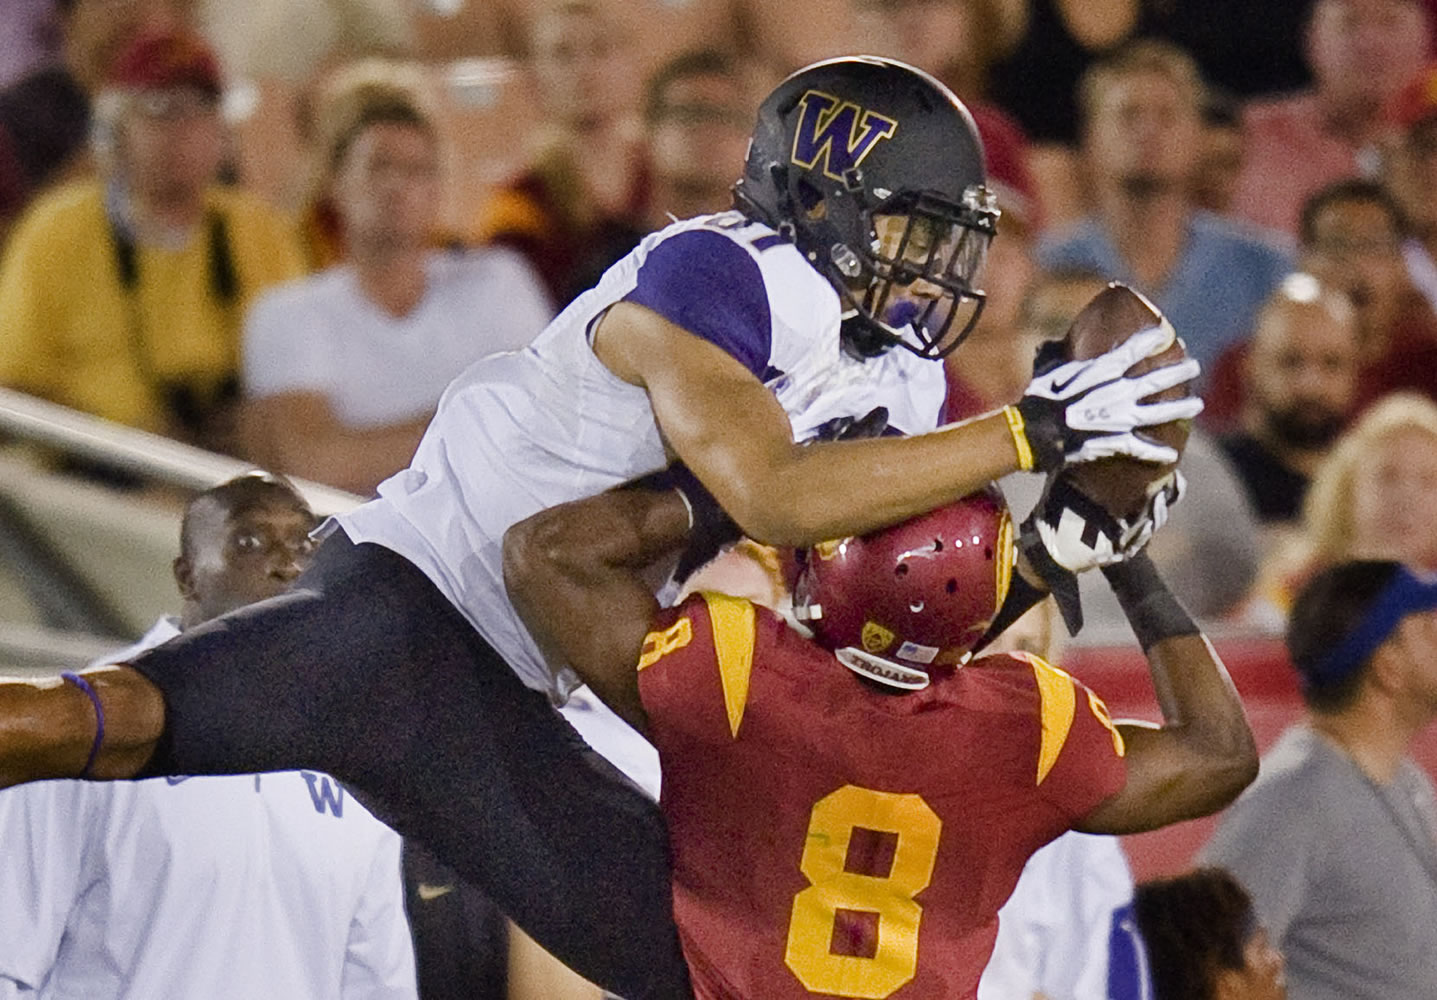 Washington wide receiver Brayden Lenius reaches over Southern California cornerback Iman Marshall to catch a pass during the third quarter of an NCAA college football game Thursday, Oct. 8, 2015, in Los Angeles. Washington won 17-12.